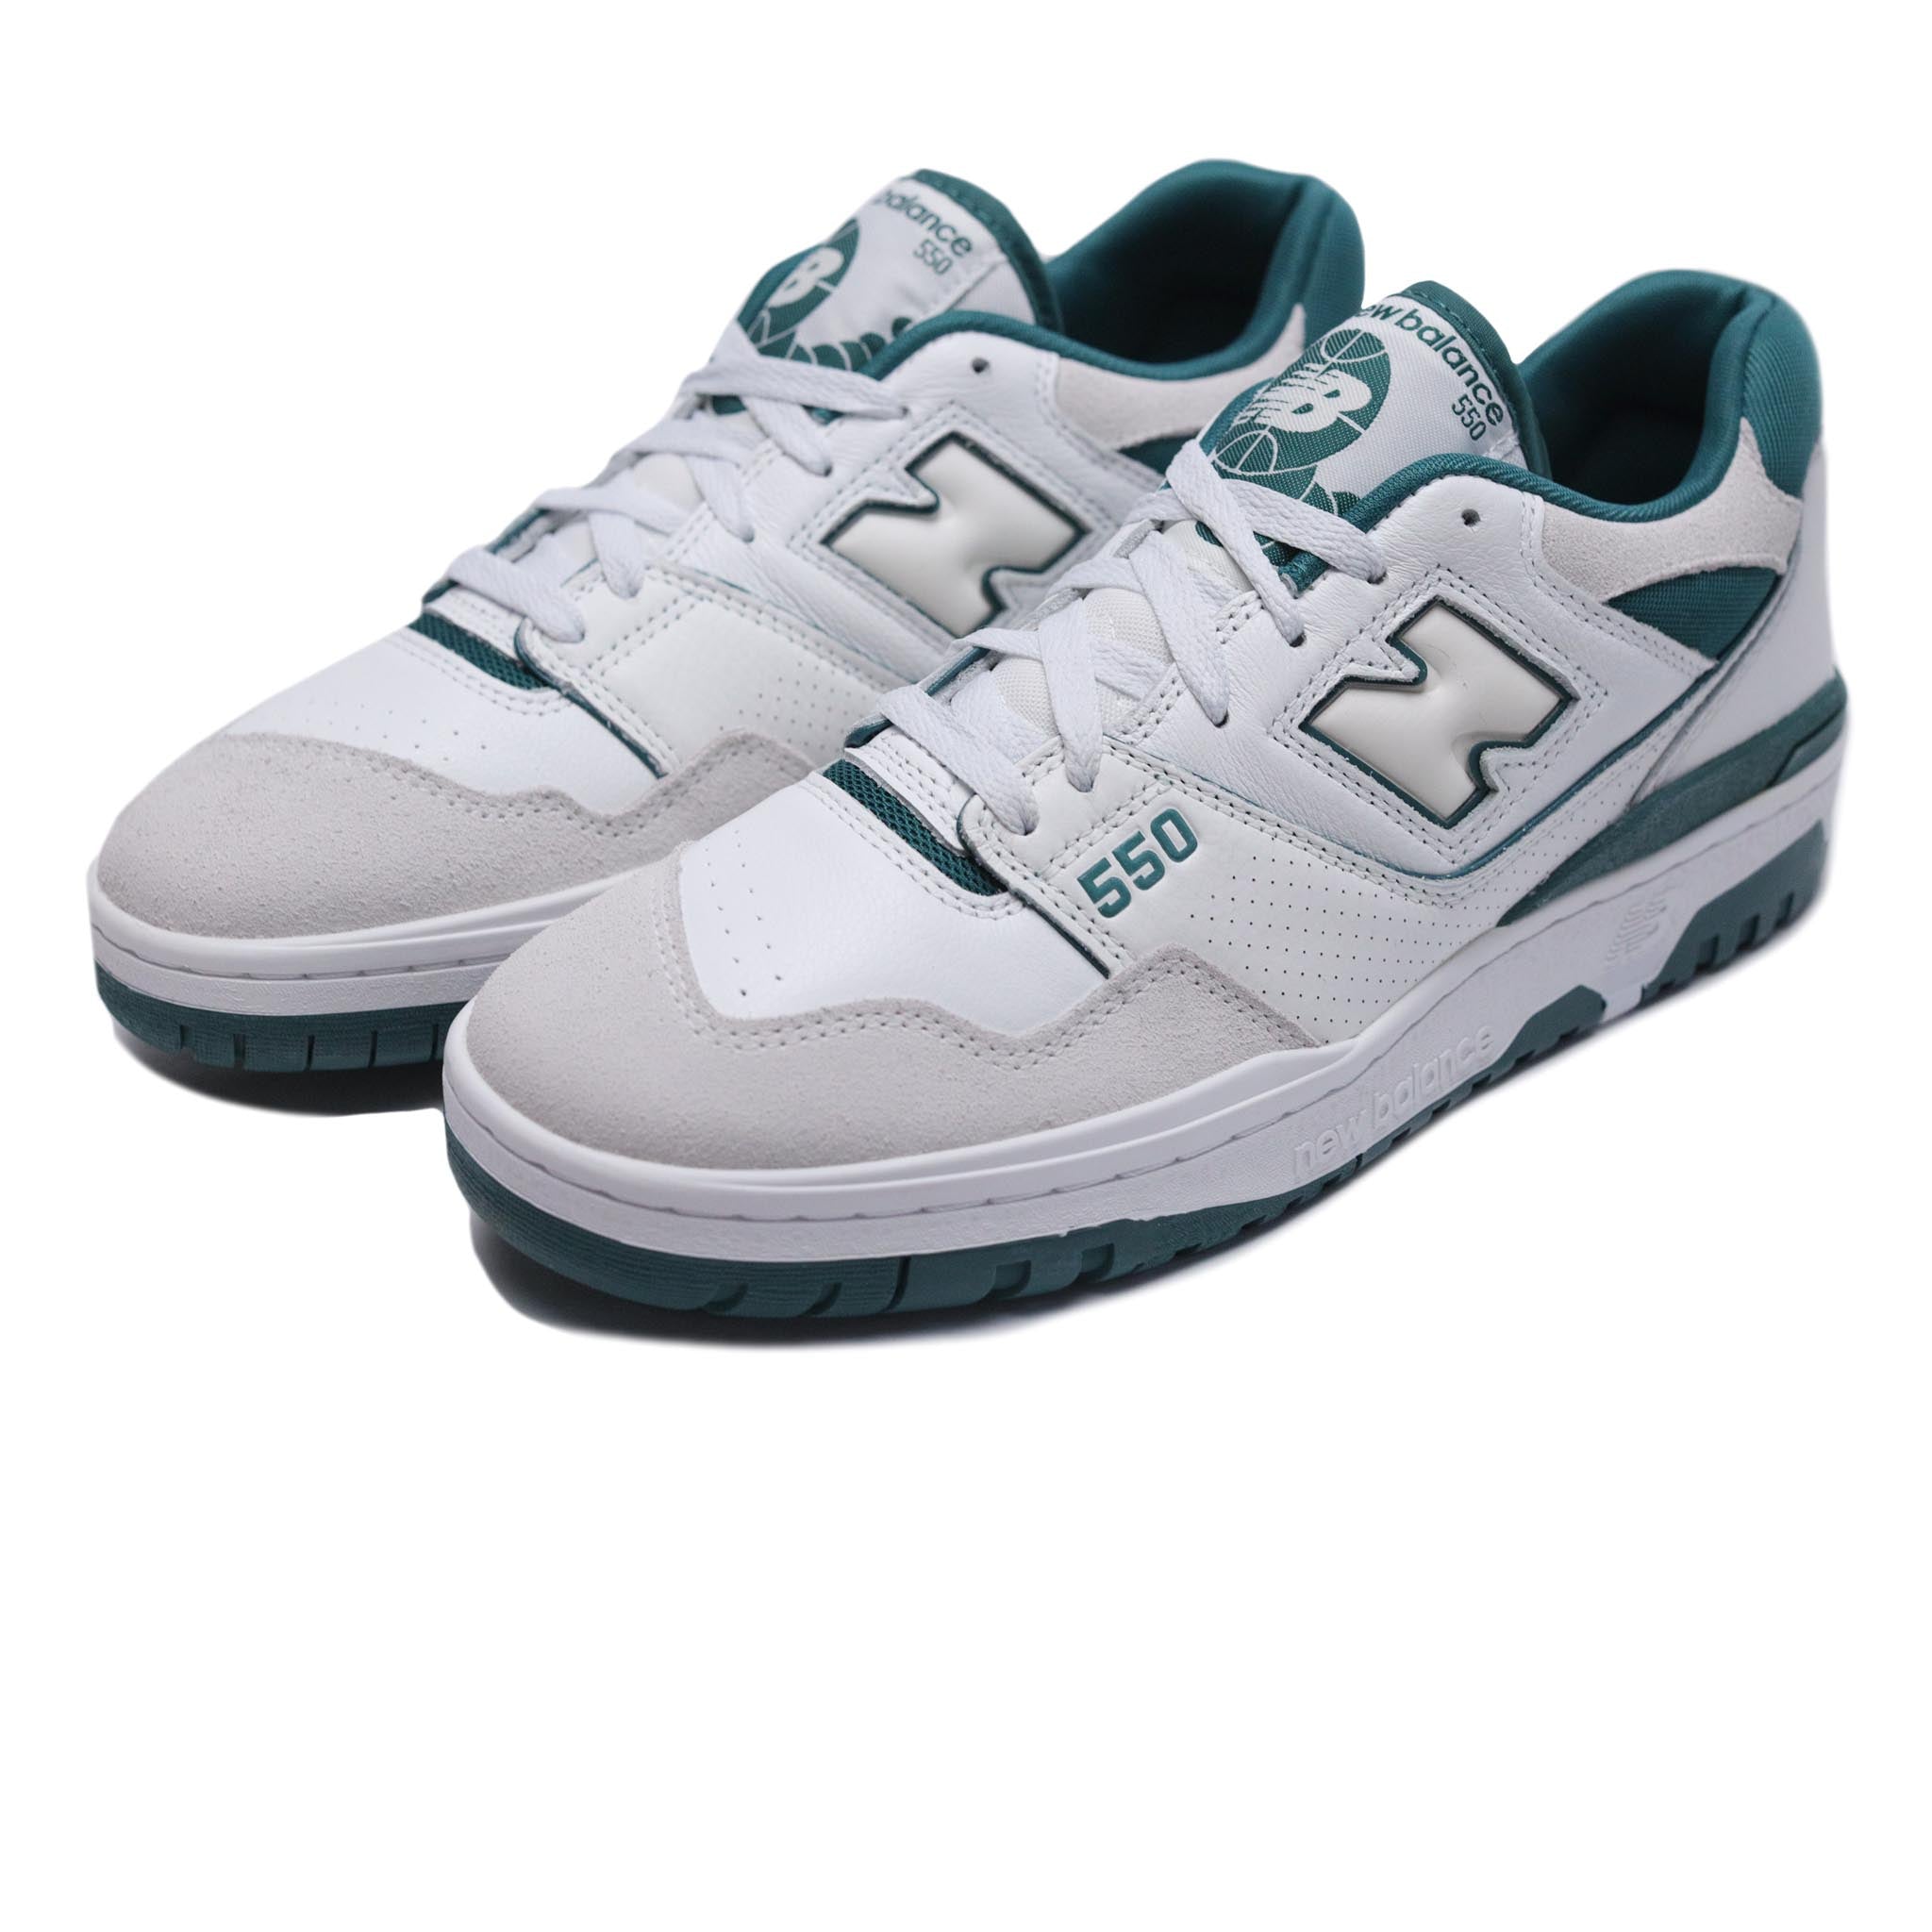 New Balance BB550STA 'Suede Pack' White/Vintage Teal